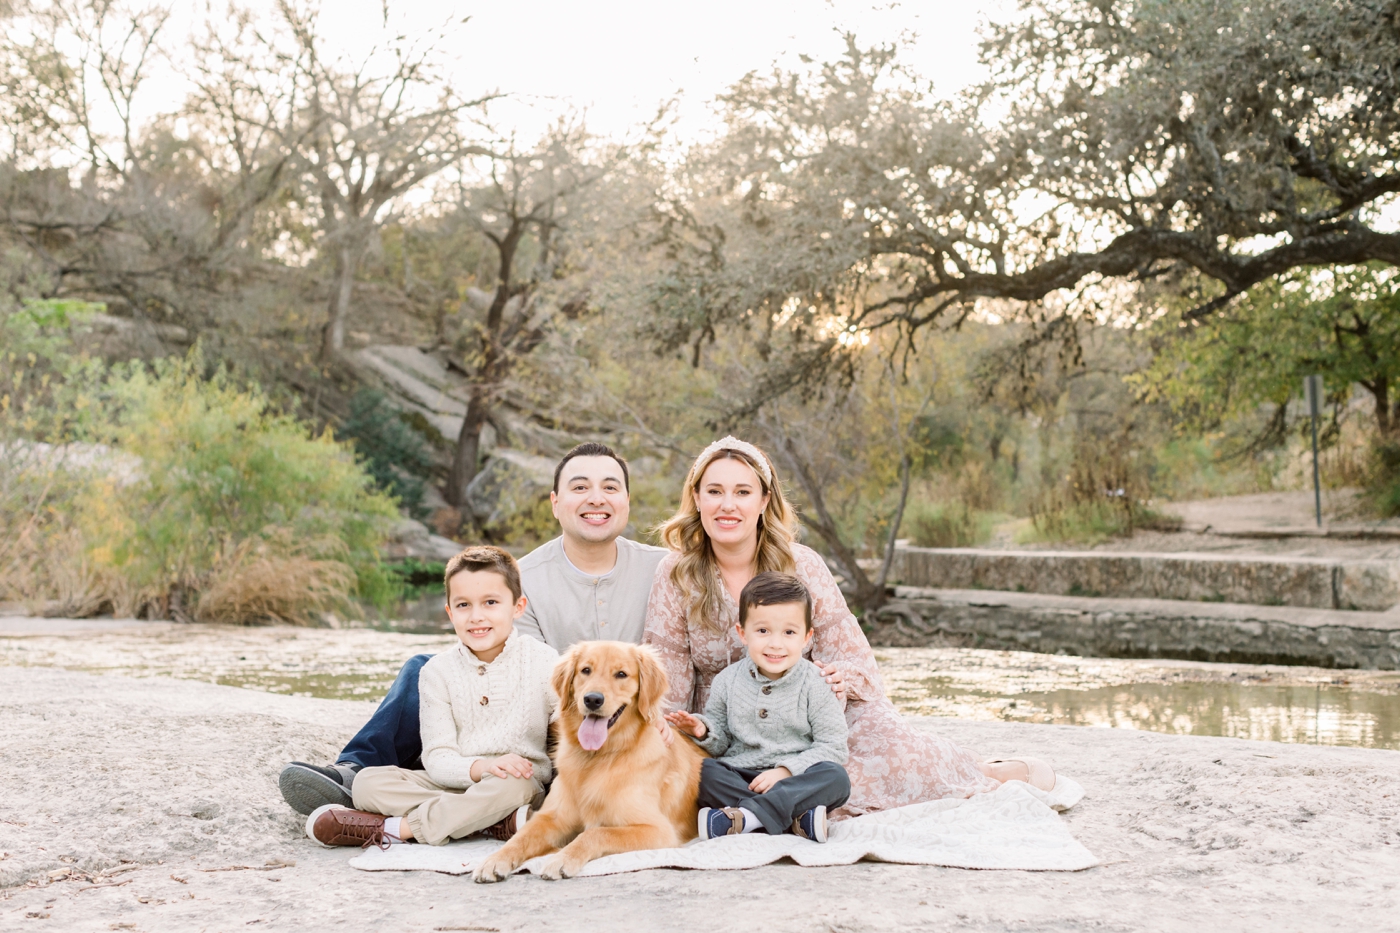 Sweet family photo with two kids and dog near creek in Austin, TX. Photo by Sana Ahmed Photography.